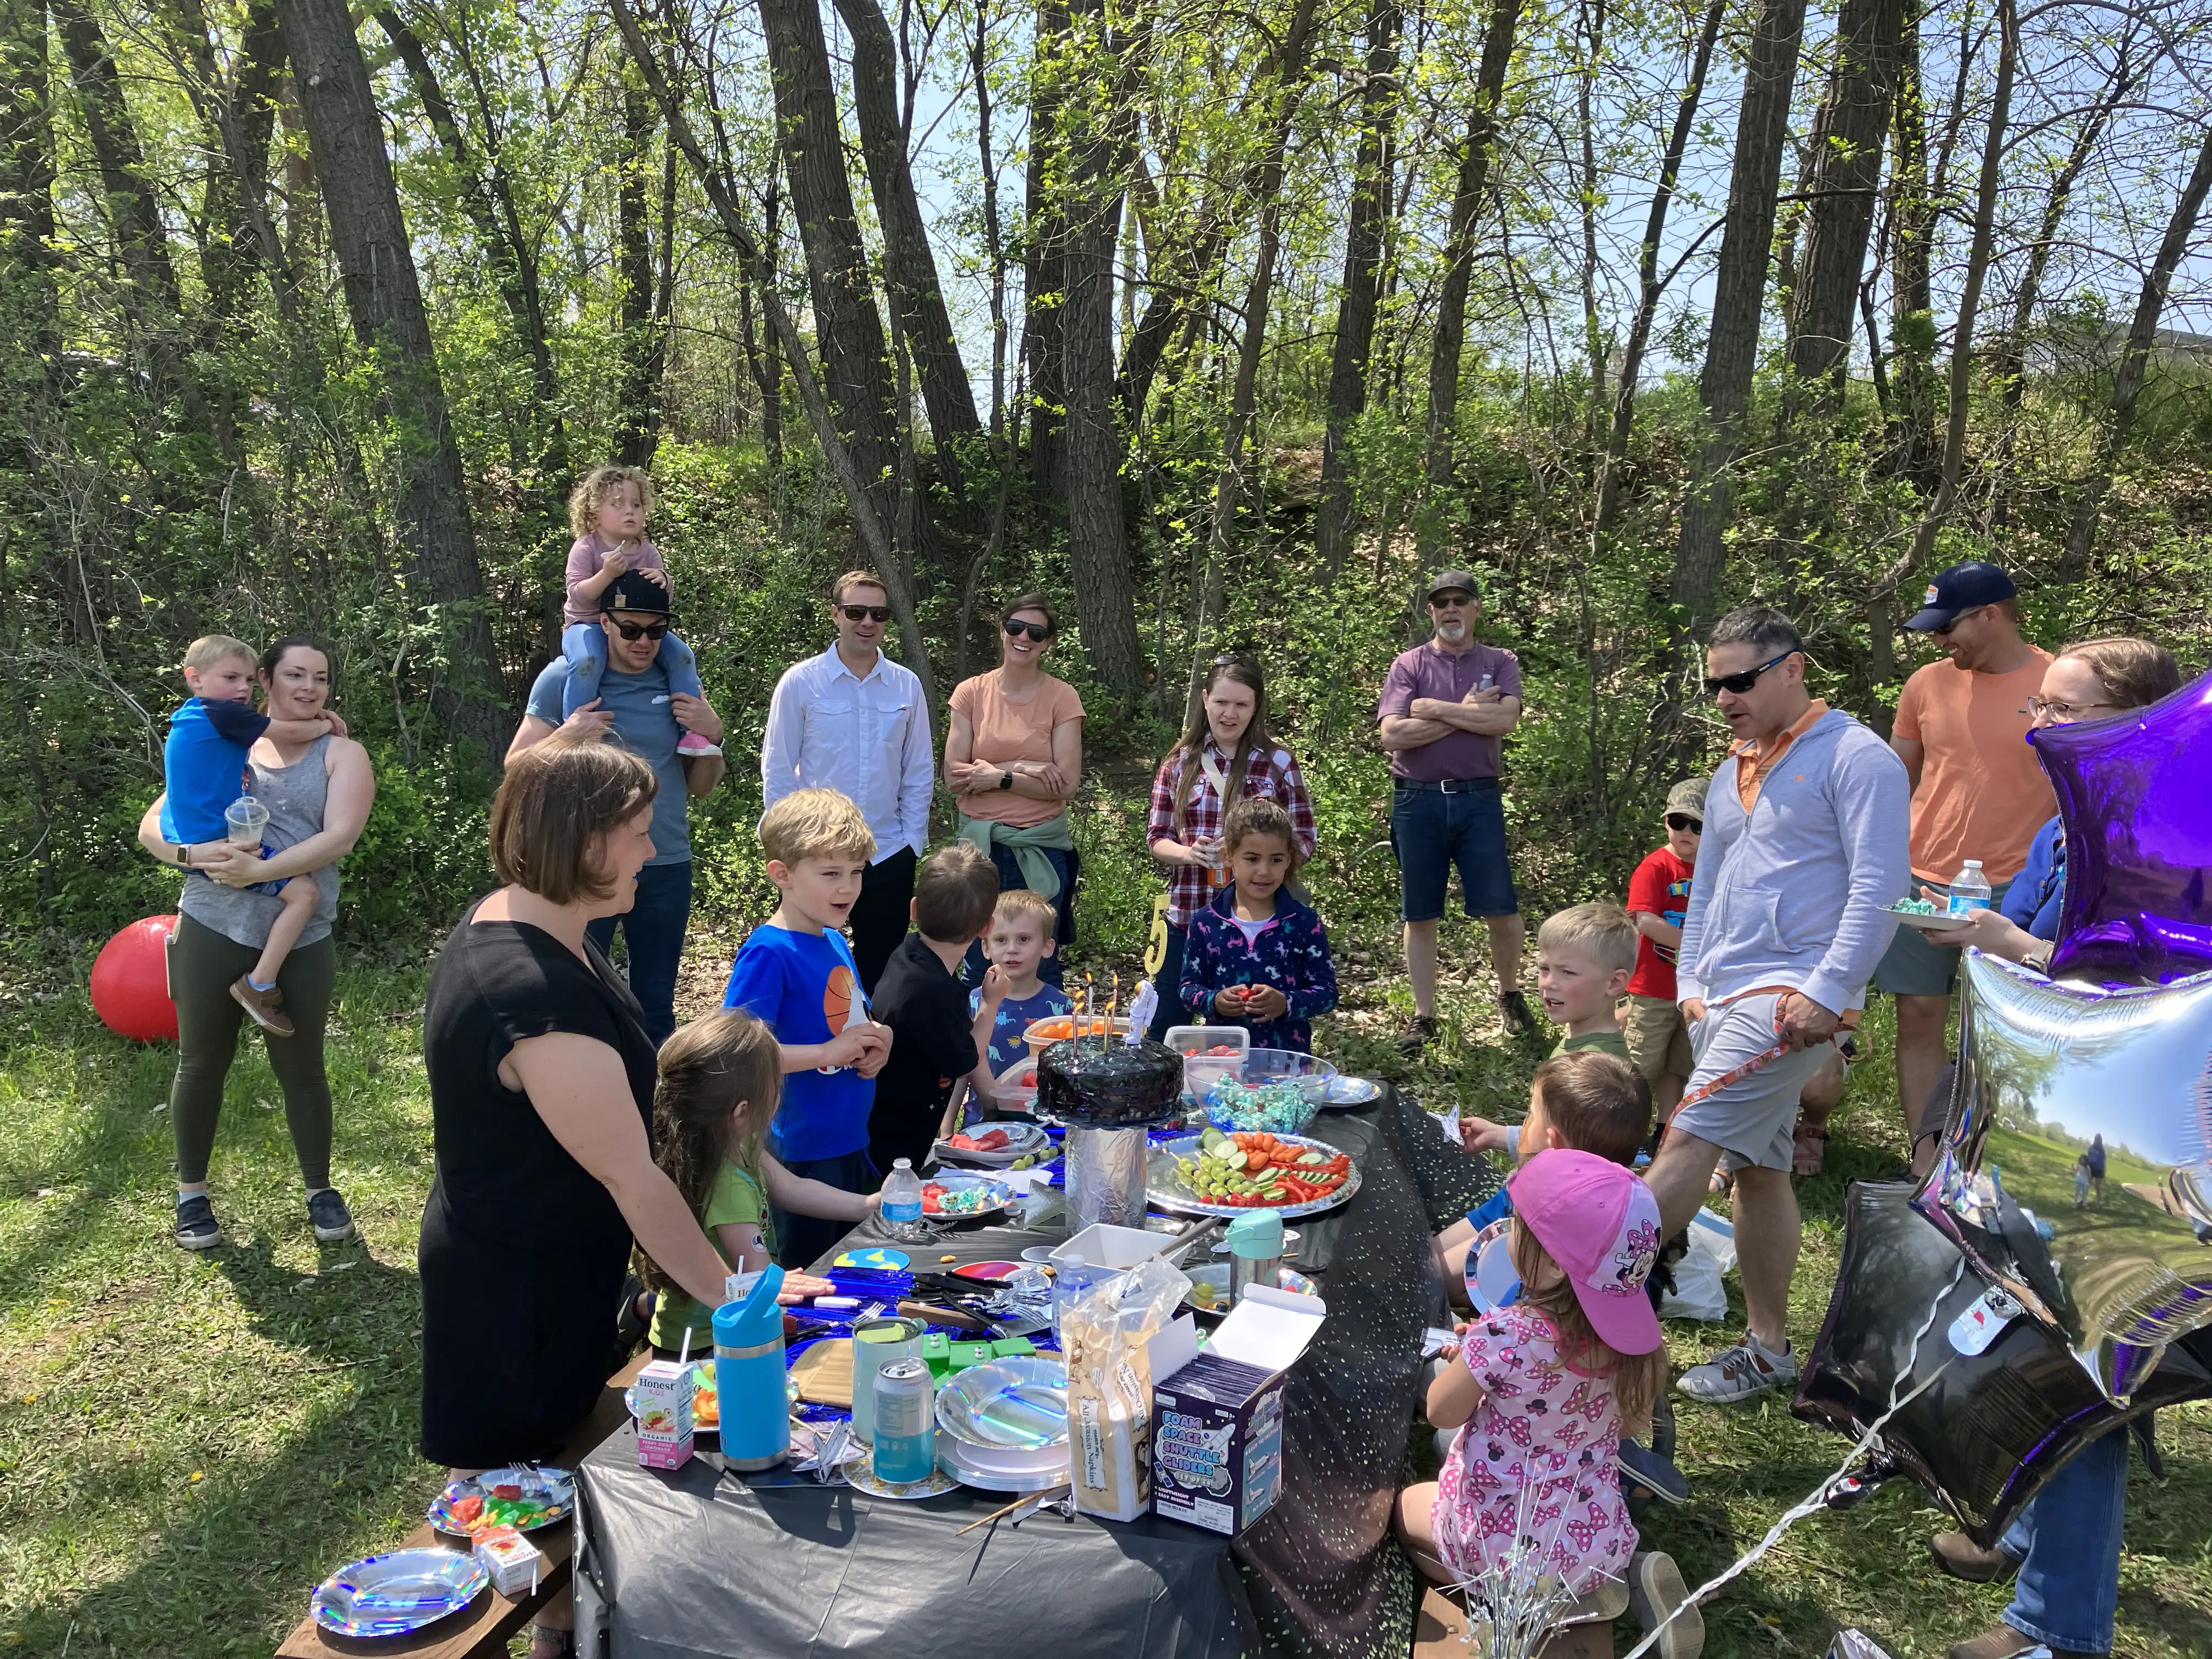 All the party goers around the birthday table. In order from left-to-right: Gina and Reese, Amie, Nate with his daughter on his shoulders, Flora and Augustus at the table, William and his wife behind, with Graham and Kyle at the table, Cora with Flora's mom behind, Grandpa Tom, then Lily, Royal, and Jorgen seated at the table, Levi in sunglasses behind Uncle Tom, then John and finally Teresa. Whew!